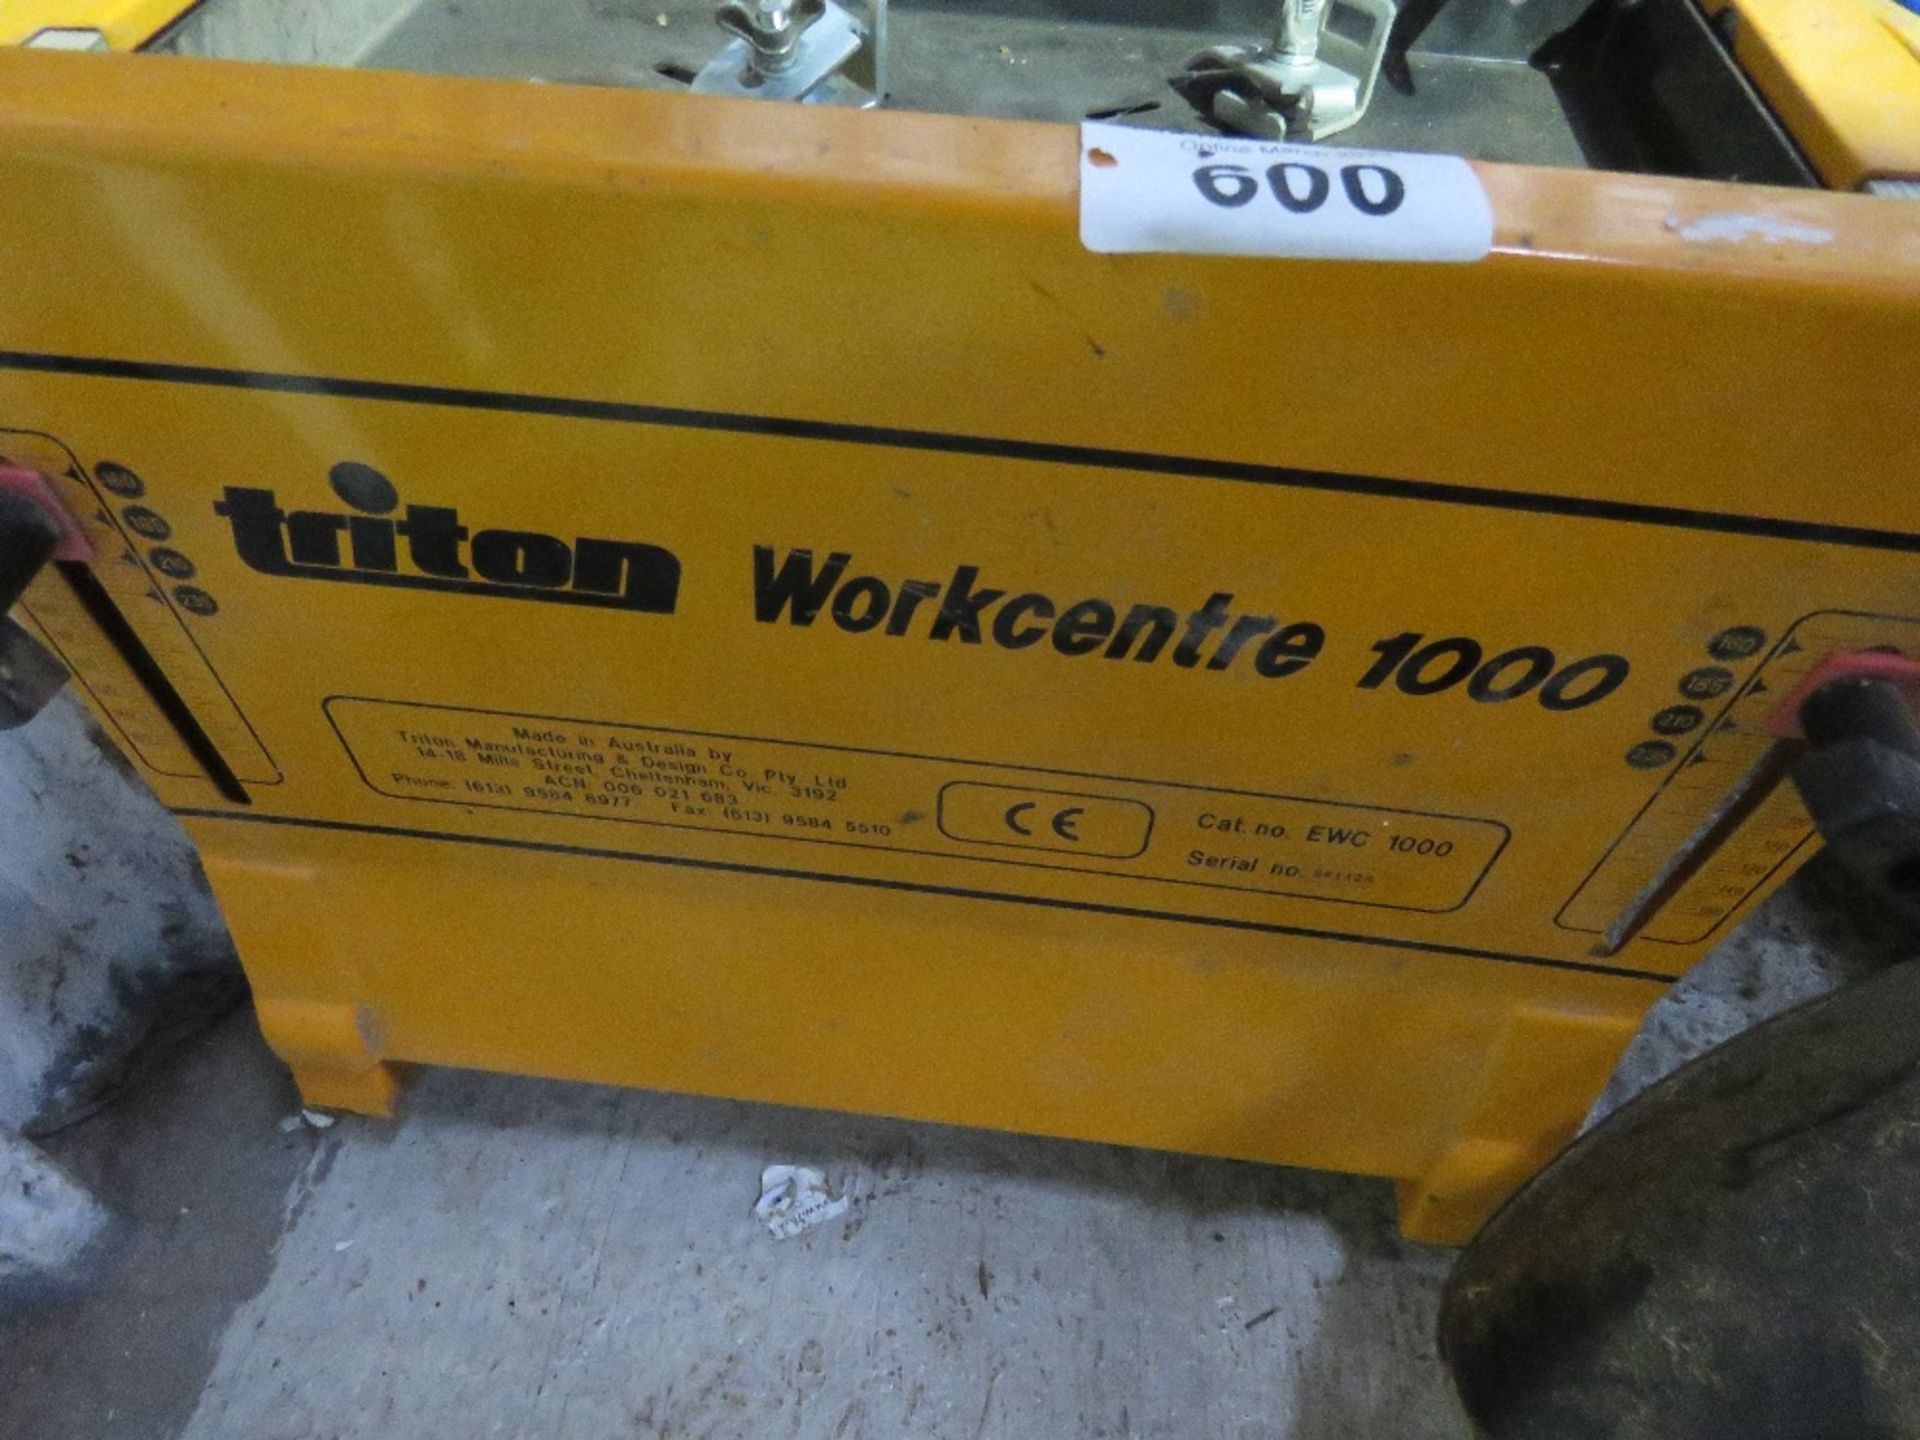 TRITON WORKCENTRE 1000 UNIT. THIS LOT IS SOLD UNDER THE AUCTIONEERS MARGIN SCHEME, THEREFORE NO - Image 2 of 4